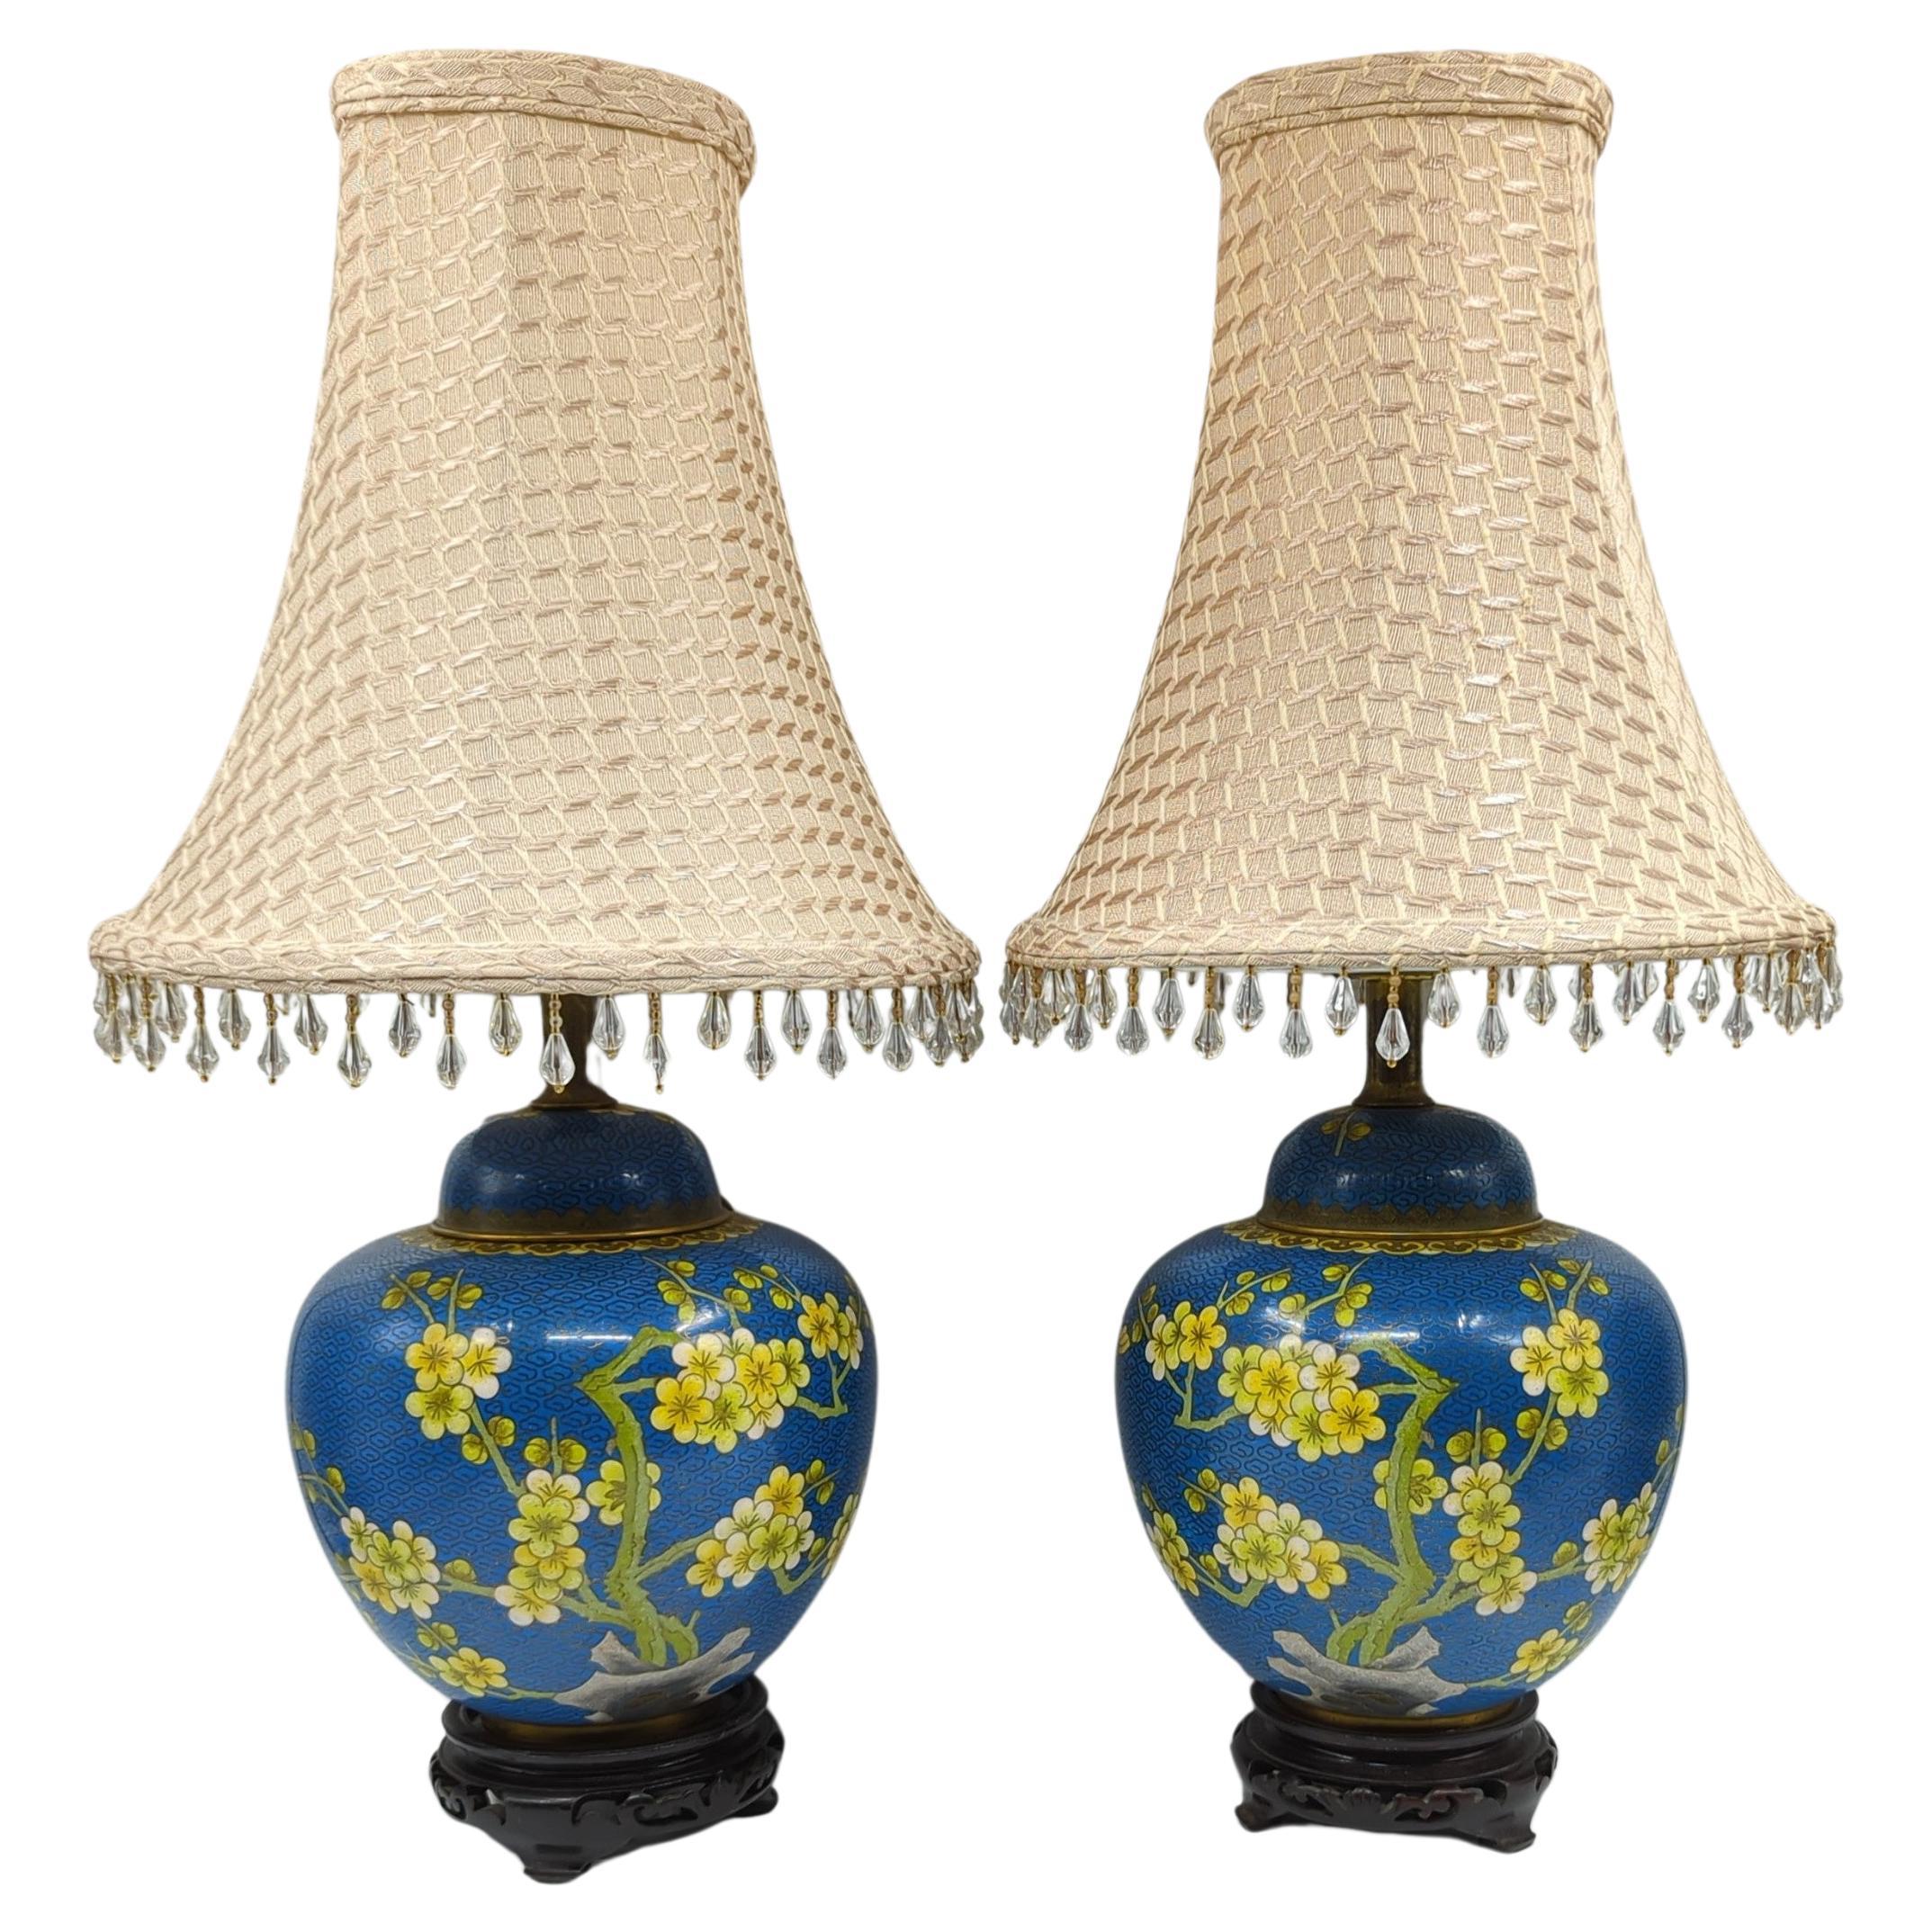 Pair Antique 19c Chinese Gilt Cloisonne Covered Prunus Ginger Jar Table Lamps For Sale 6